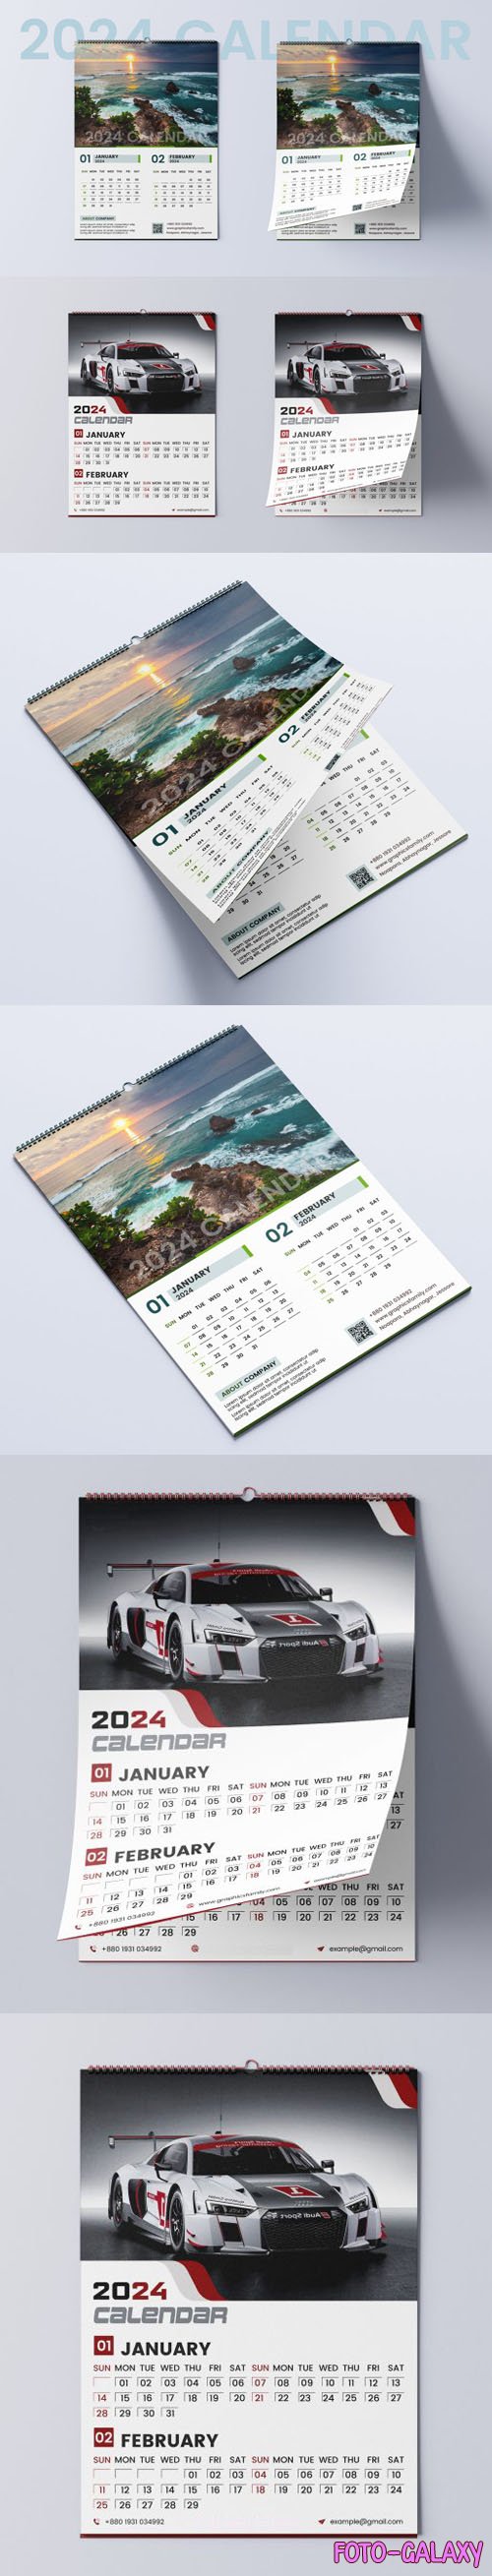 2 Wall Calendars for New Year 2024 - PSD Templates